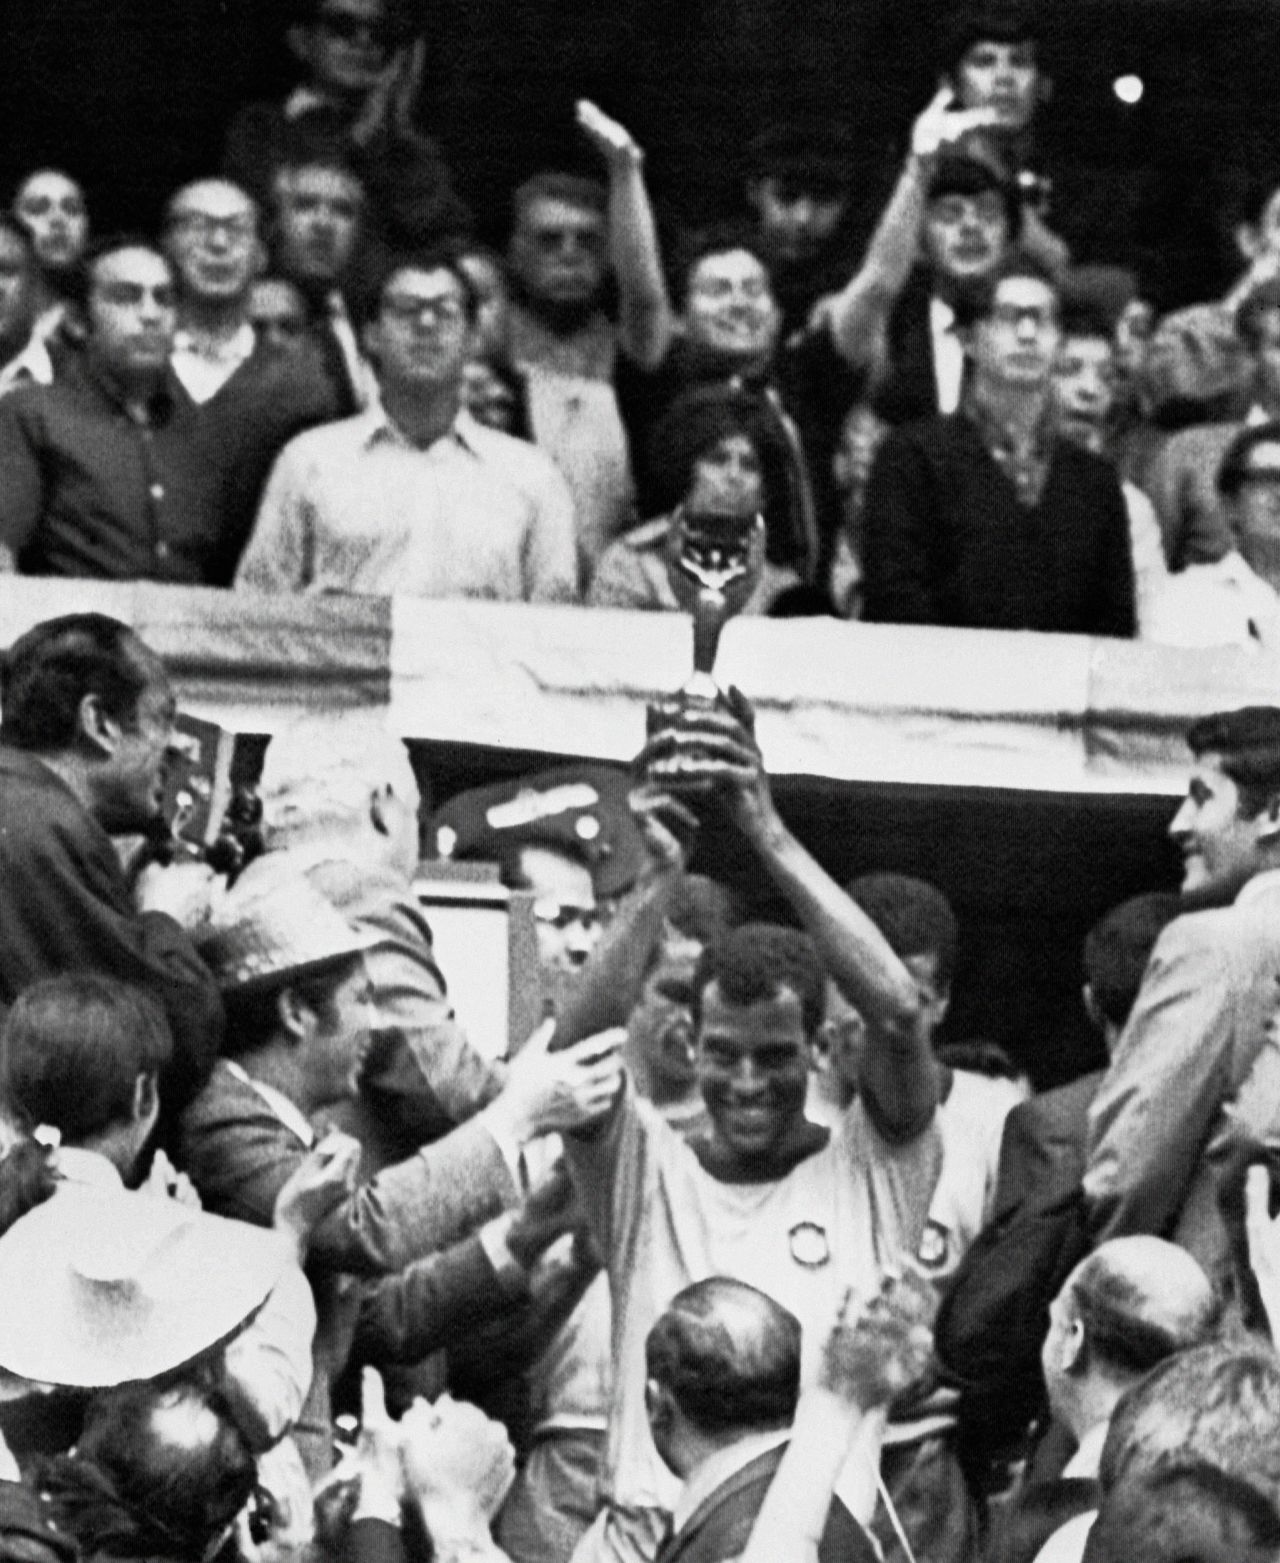 Carlos Alberto, captain of the 1970 team, lifts the Jules Rimet trophy which Brazil was allowed to keep after becoming the first nation to win the World Cup three times. The former fullback thinks next year's World Cup will come too soon for Brazil's inexperienced team.